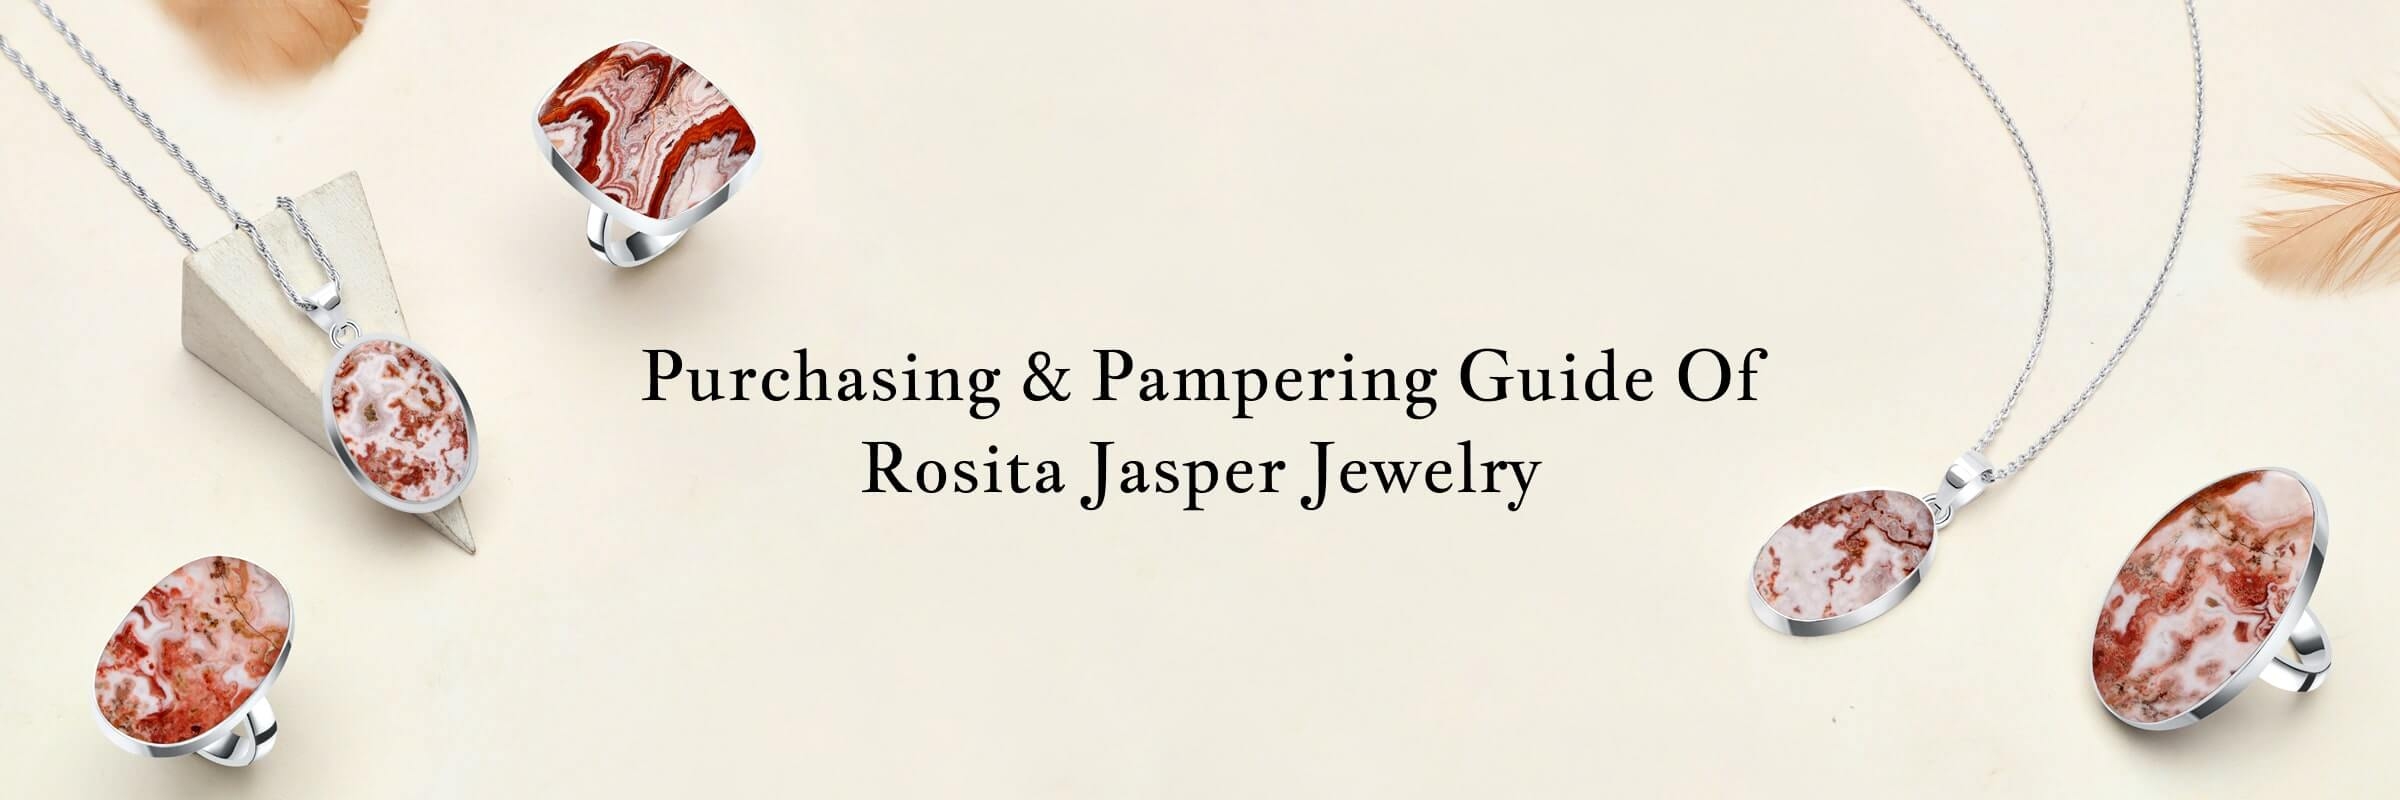 How to Care for Rosita Jasper Jewelry & where to Buy Rosita Jasper Jewelry